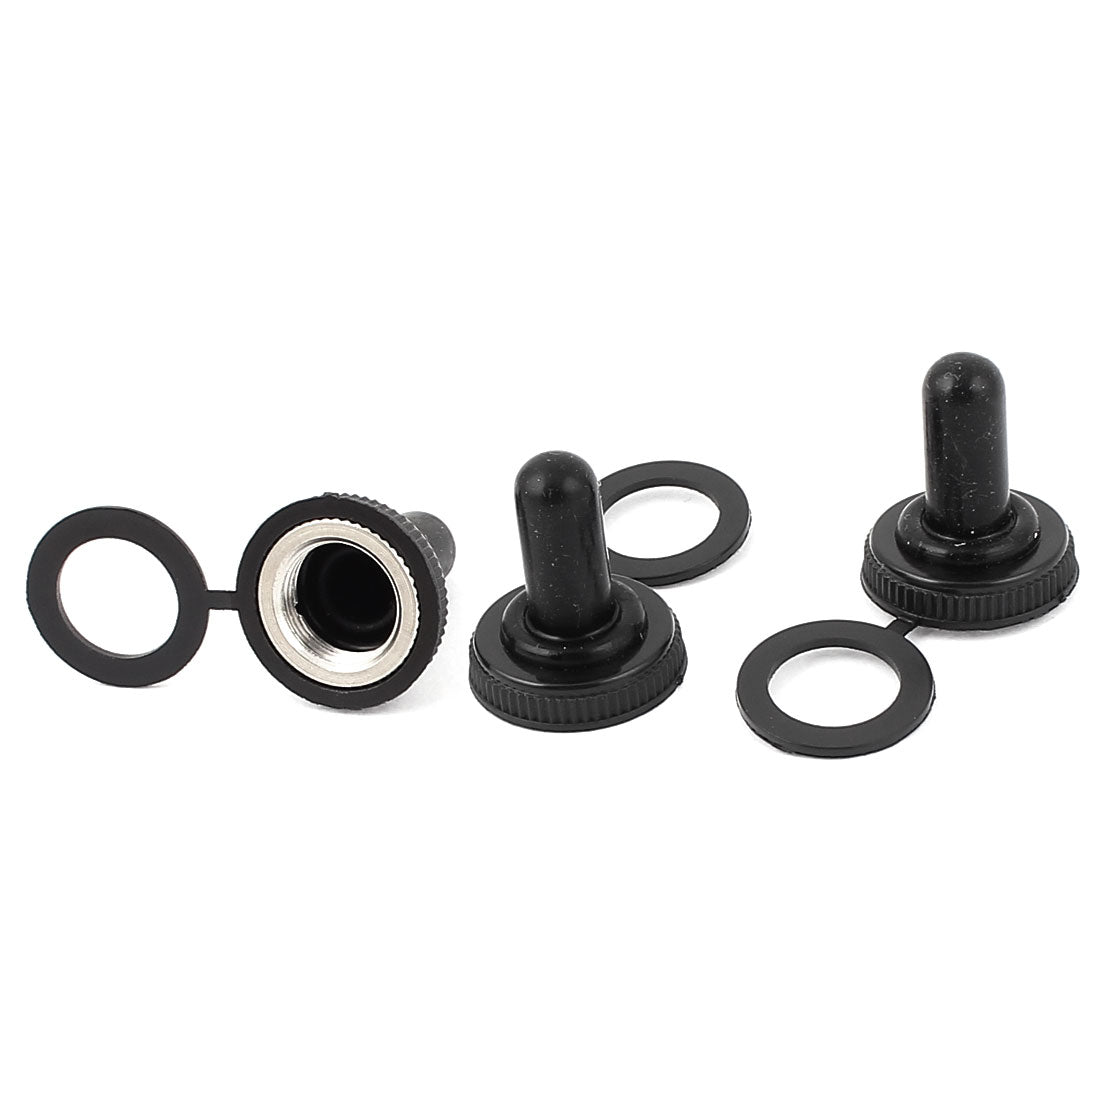 uxcell Uxcell 3 Pcs 11mm Female Thread Waterproof Toggle Switch Boot Rubber Cover Cap Protector Black